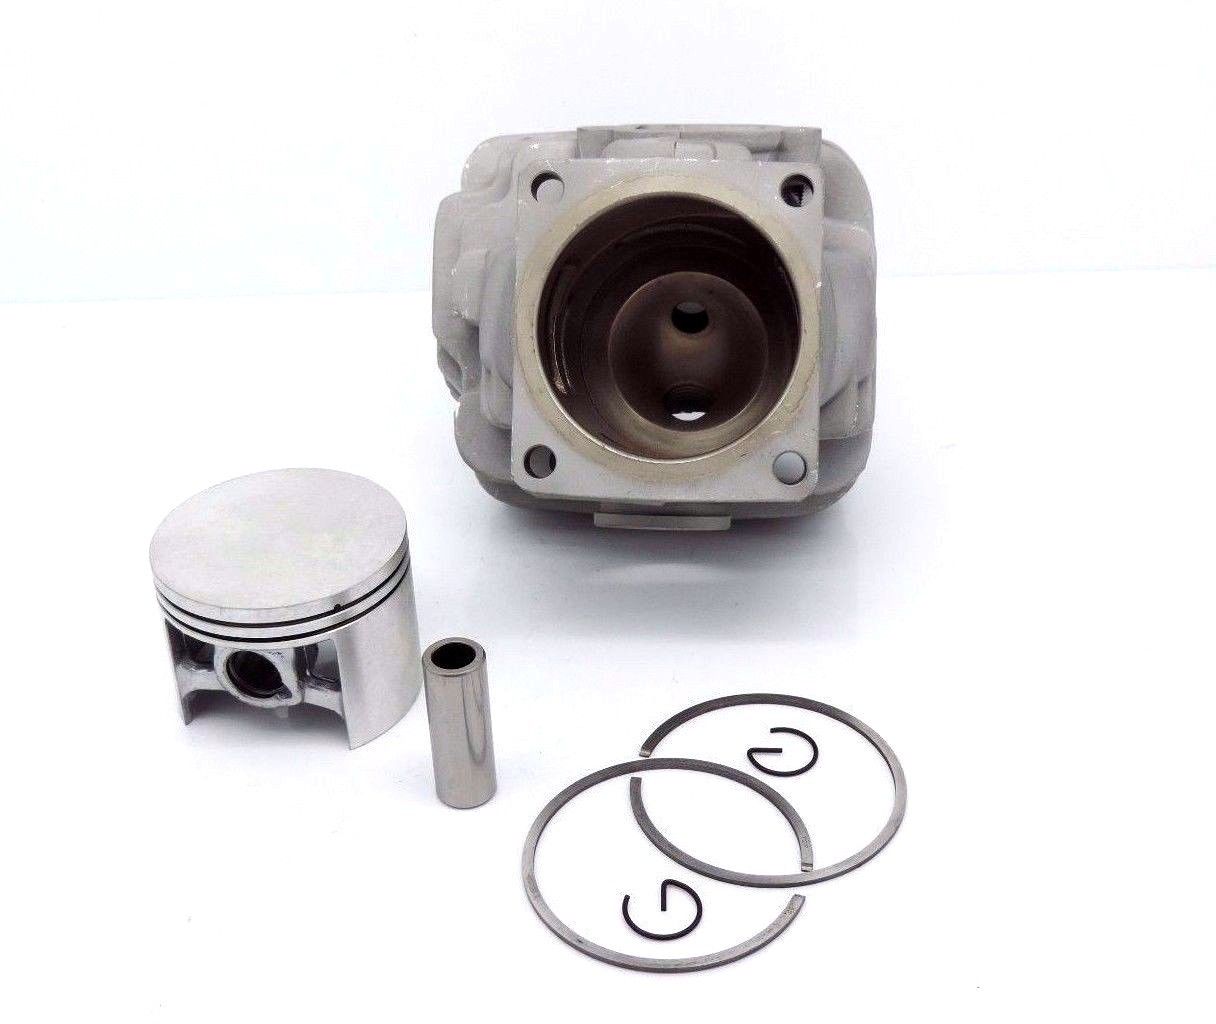 52MM Cylinder Piston Kit For Stihl 046 MS460 Chainsaw 1128 020 1221 With Pin Ring Circlip